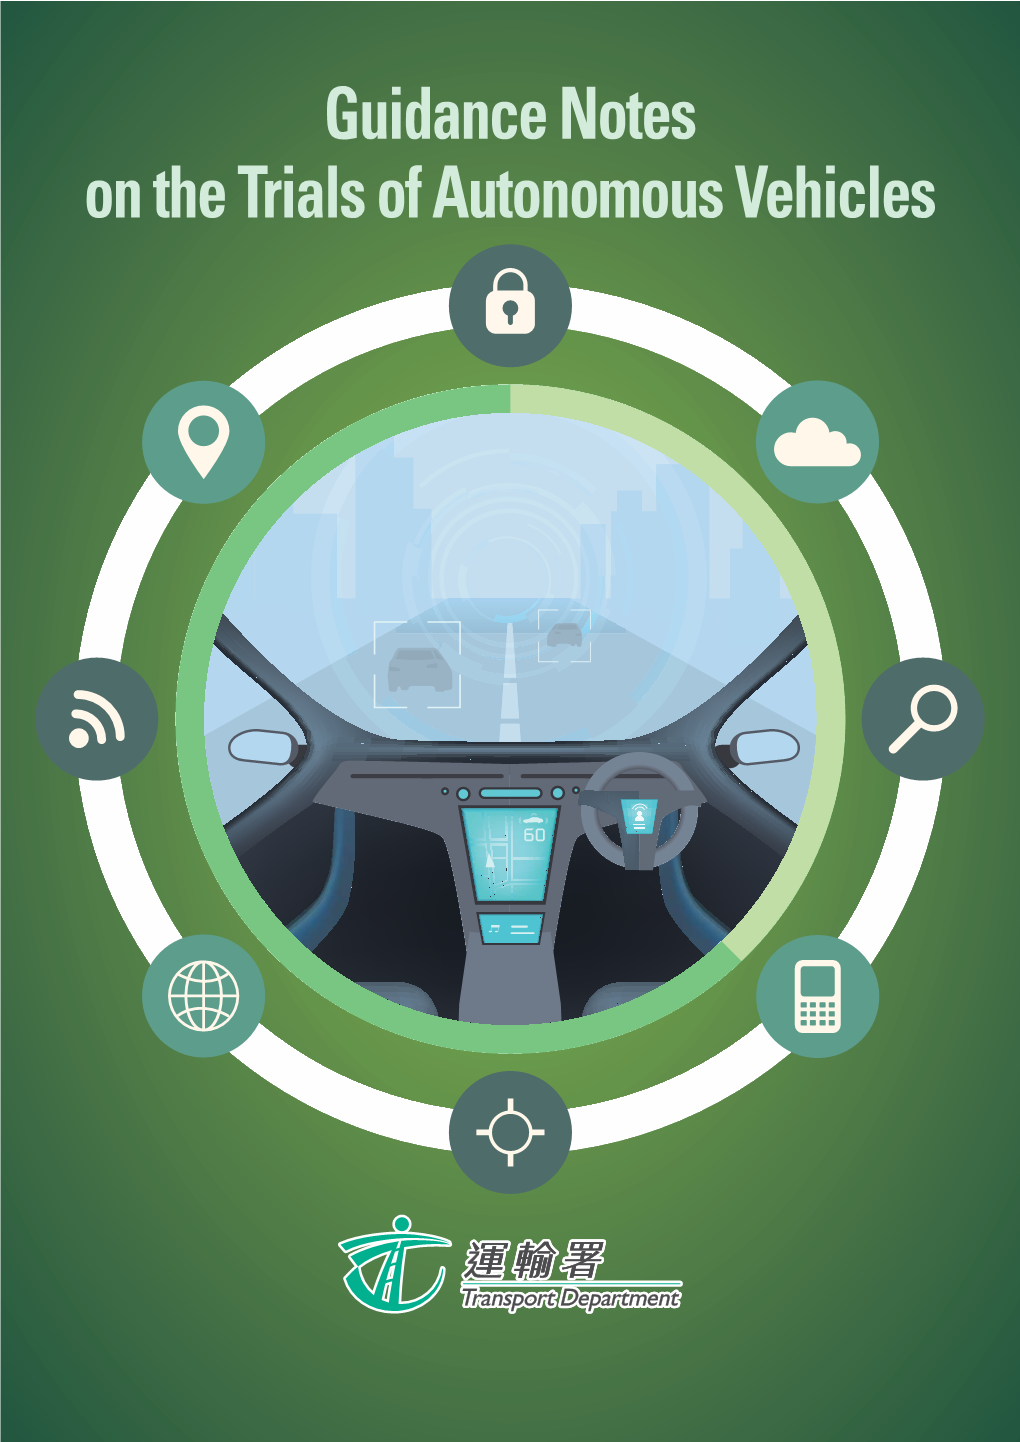 Guidance Notes on the Trials of Autonomous Vehicles